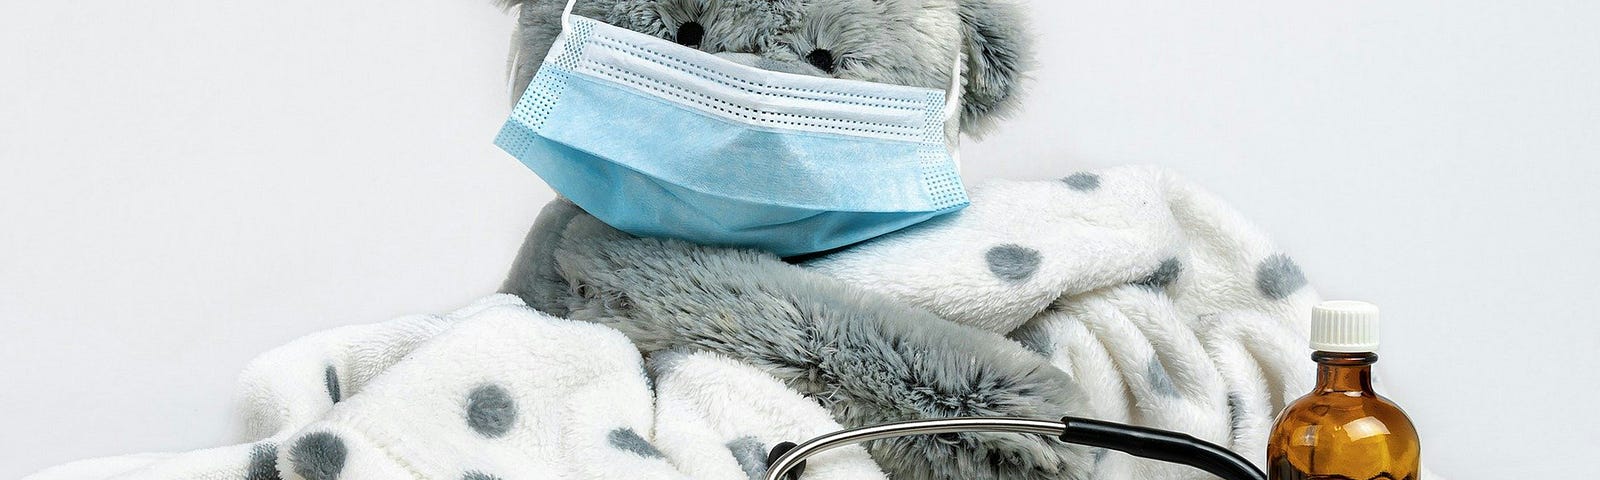 A gray teddy bear covered in a blanket and a face mask, with pills, a stethoscope, and cough syrup in the foreground